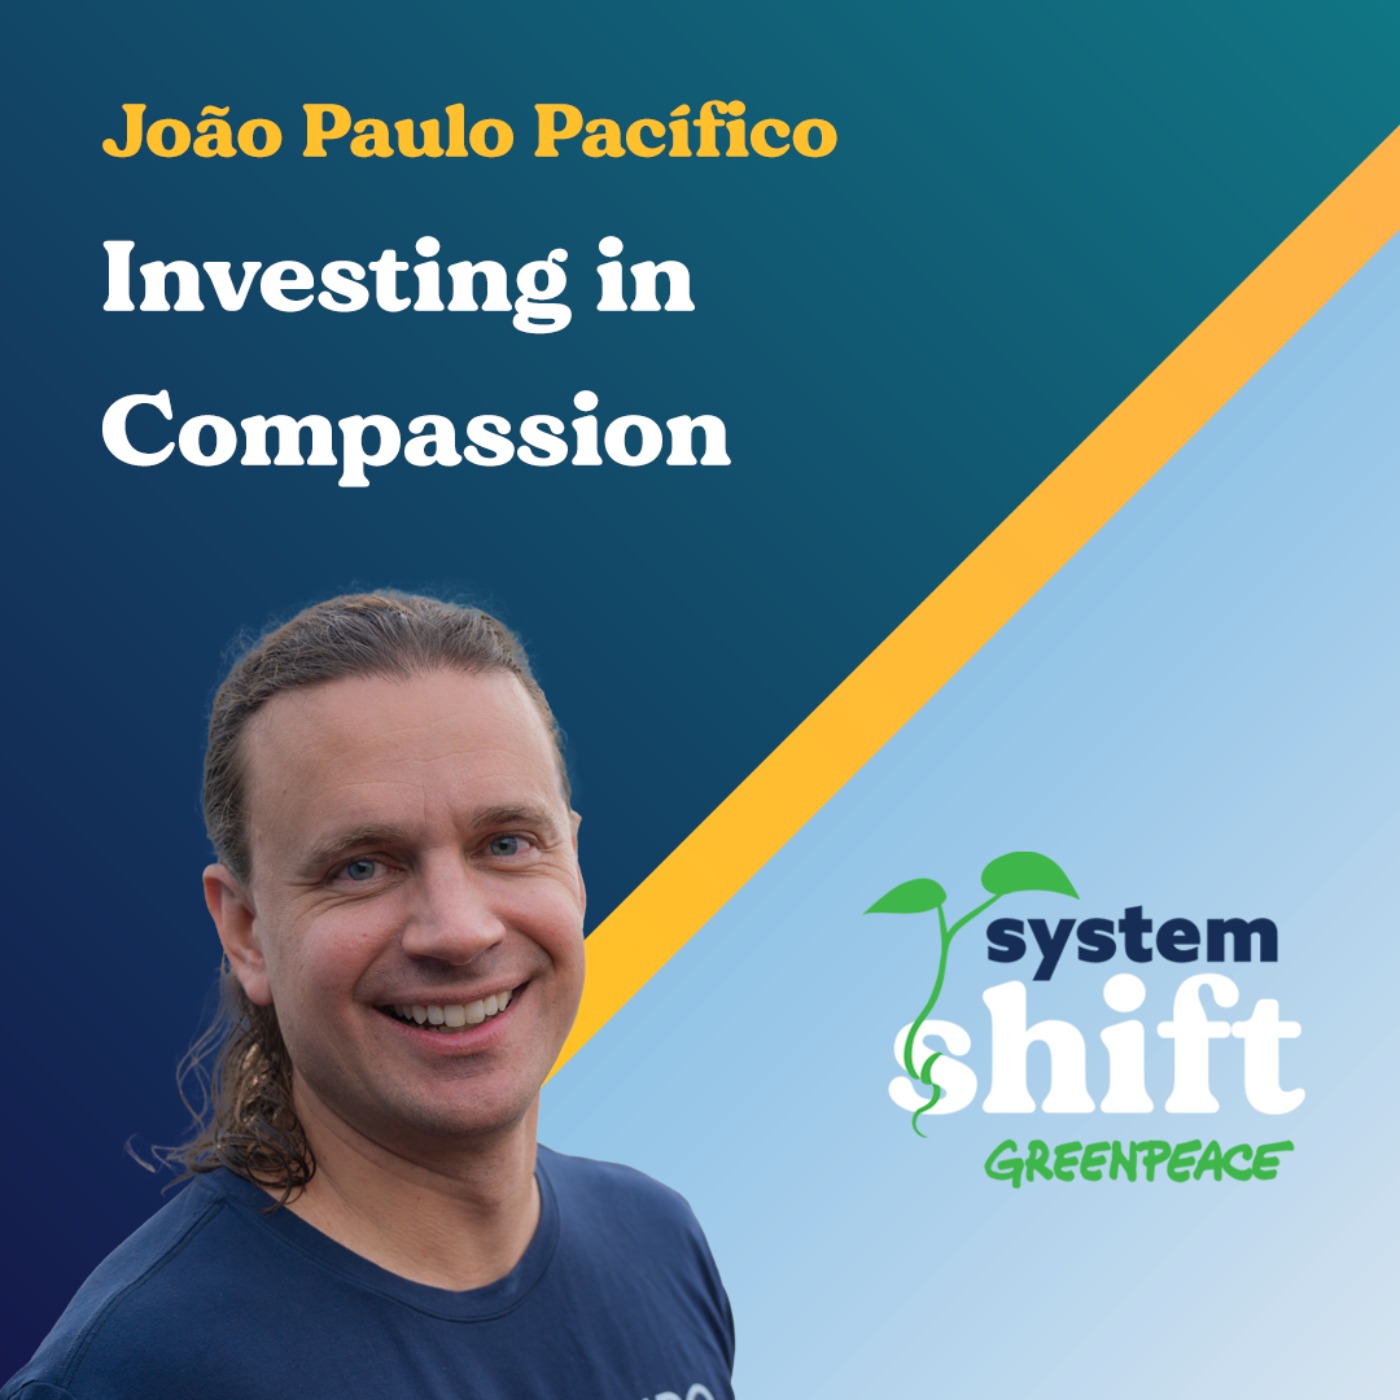 João Paulo Pacífico: Investing in Compassion